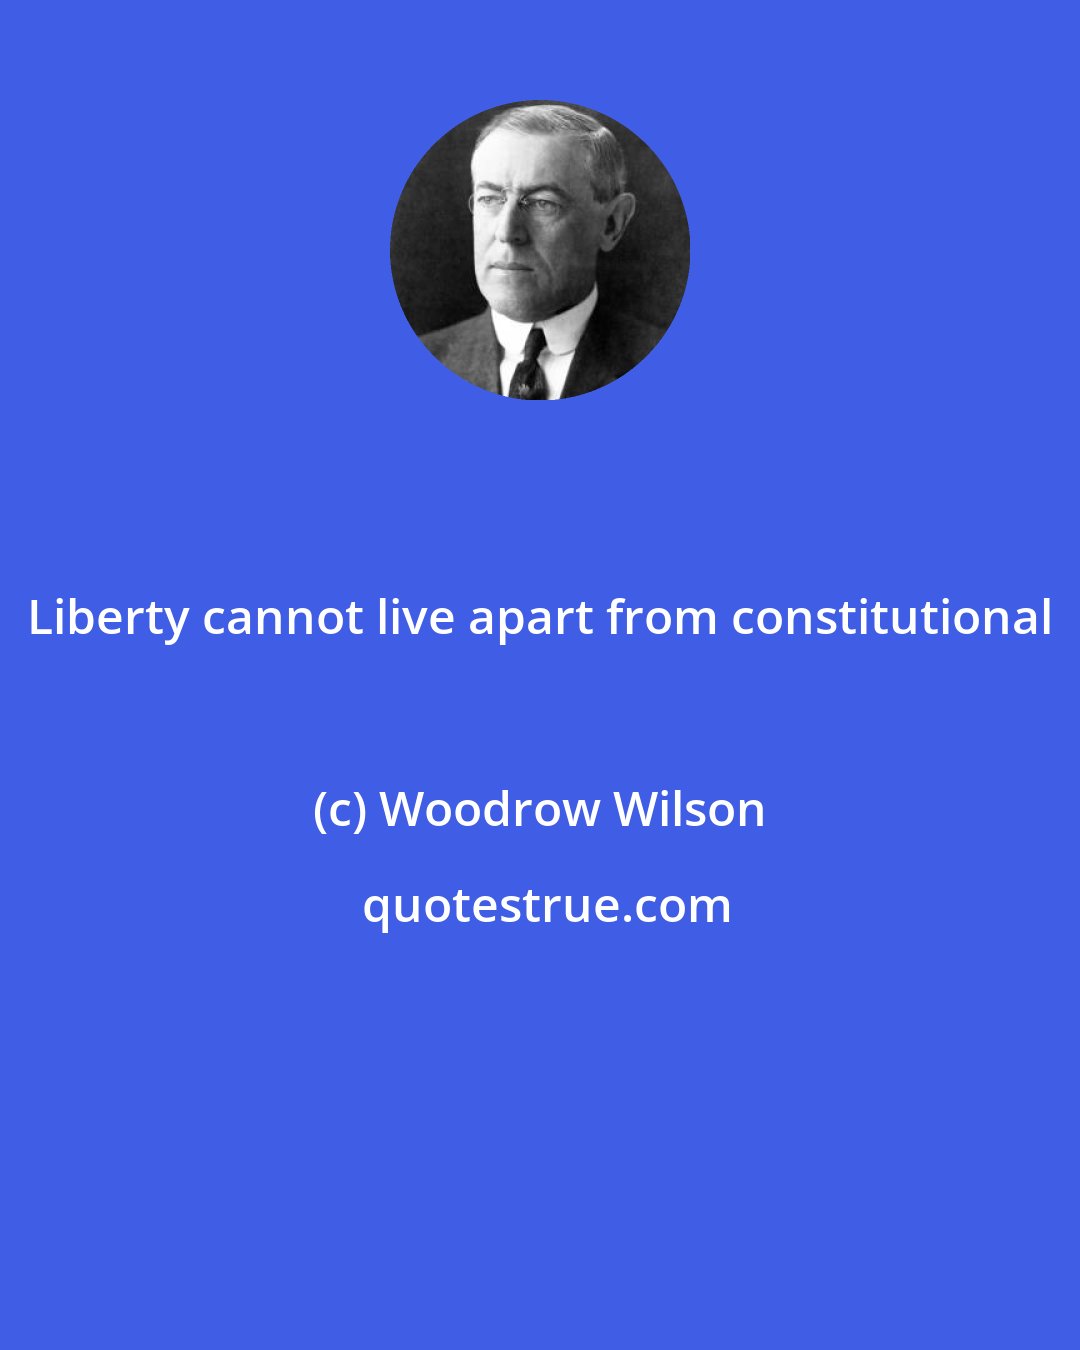 Woodrow Wilson: Liberty cannot live apart from constitutional